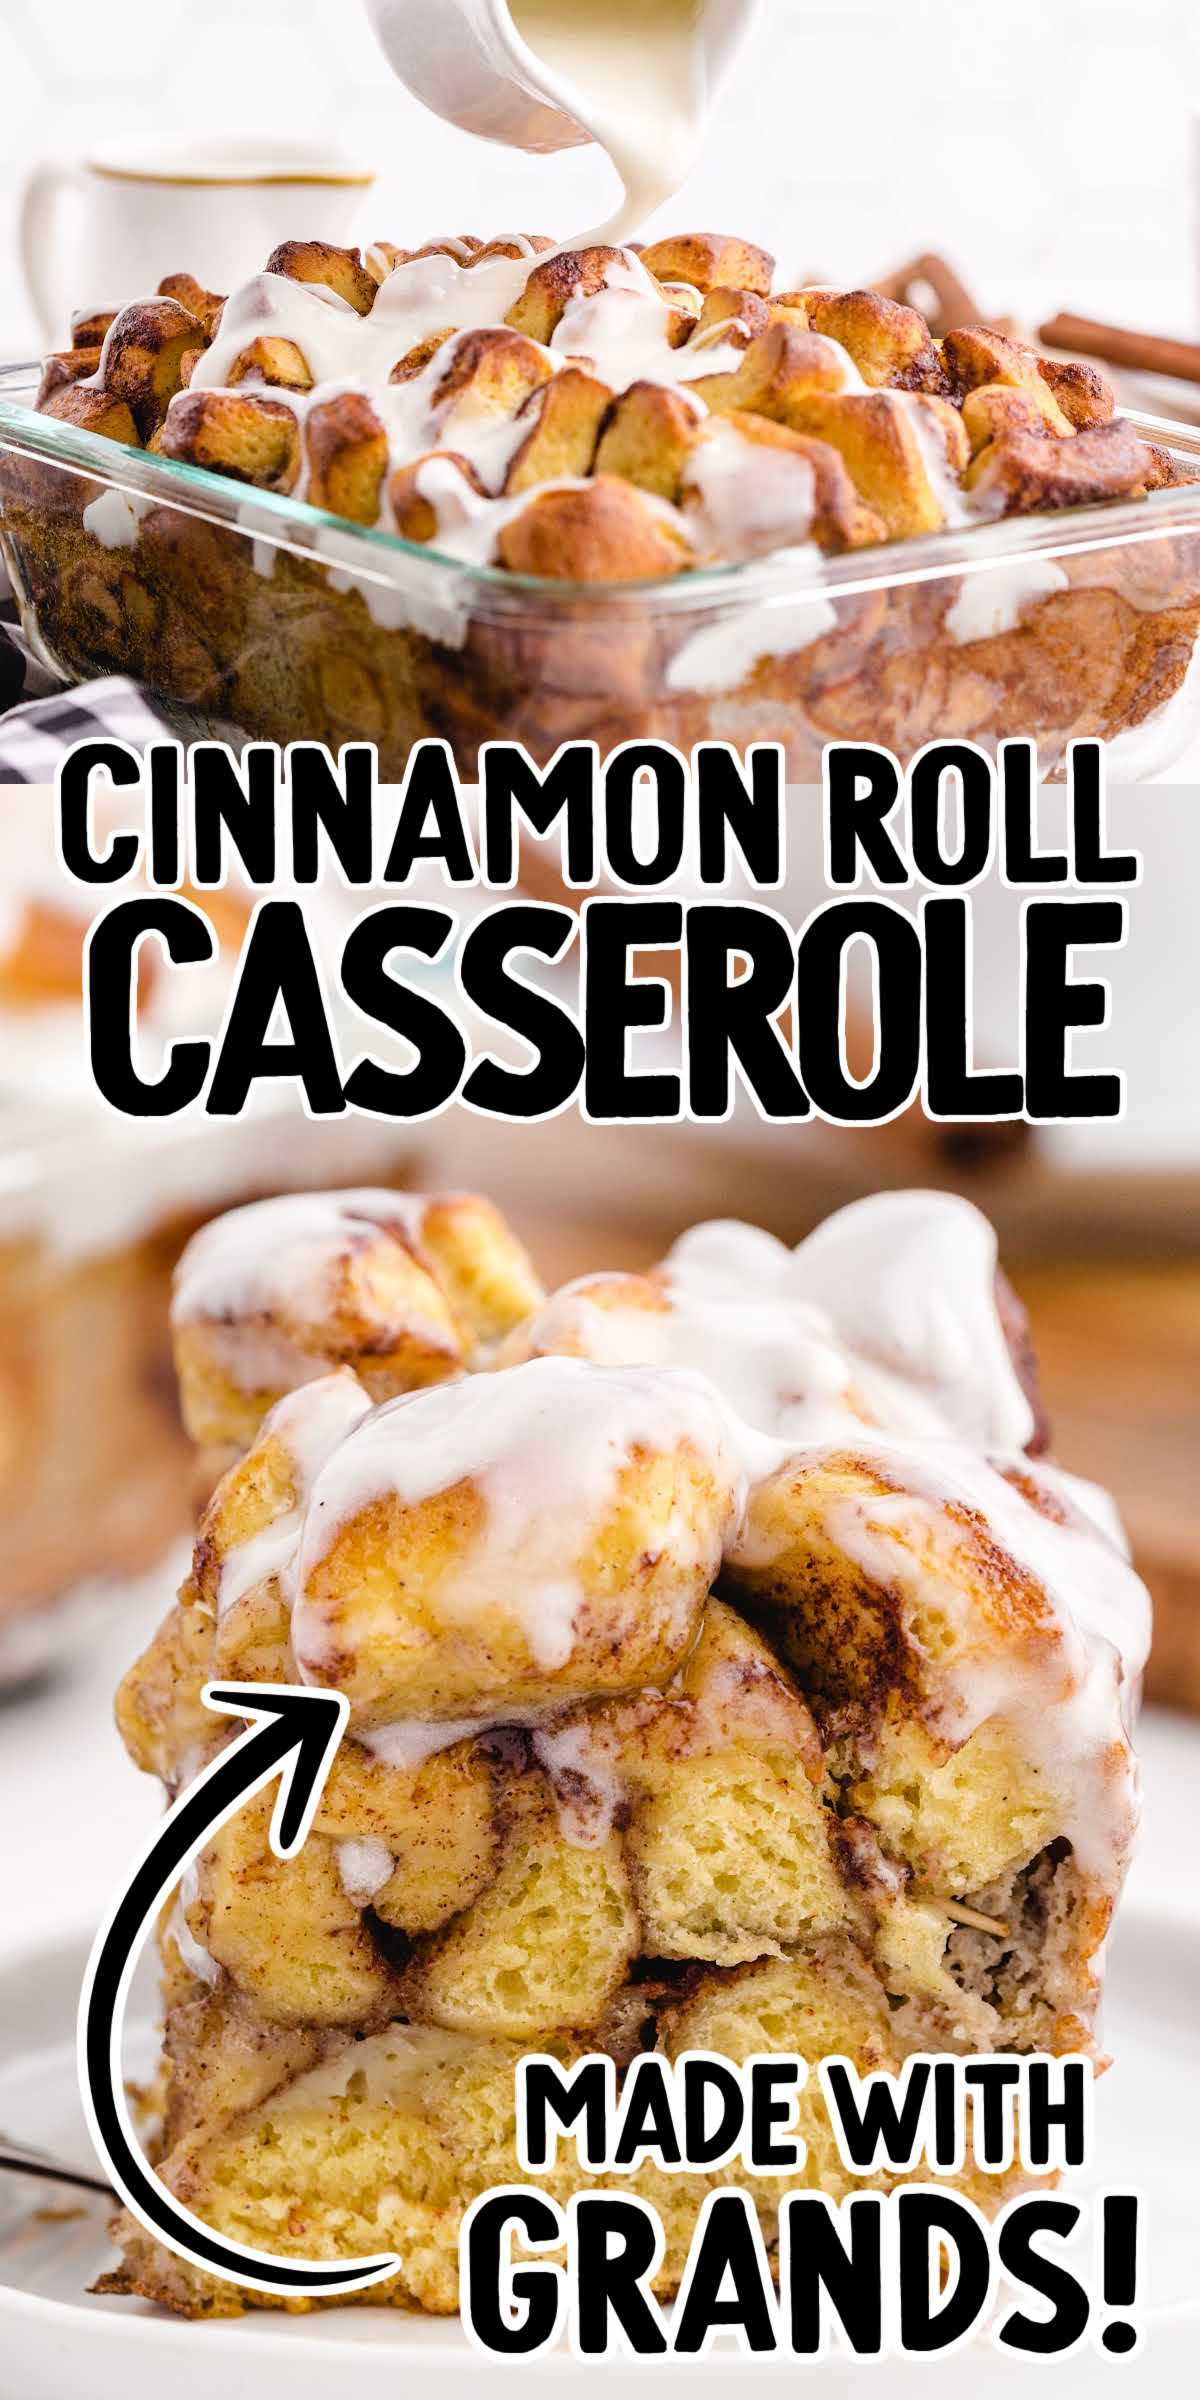 Cinnamon Roll Casserole- Spaceships and Laser Beams